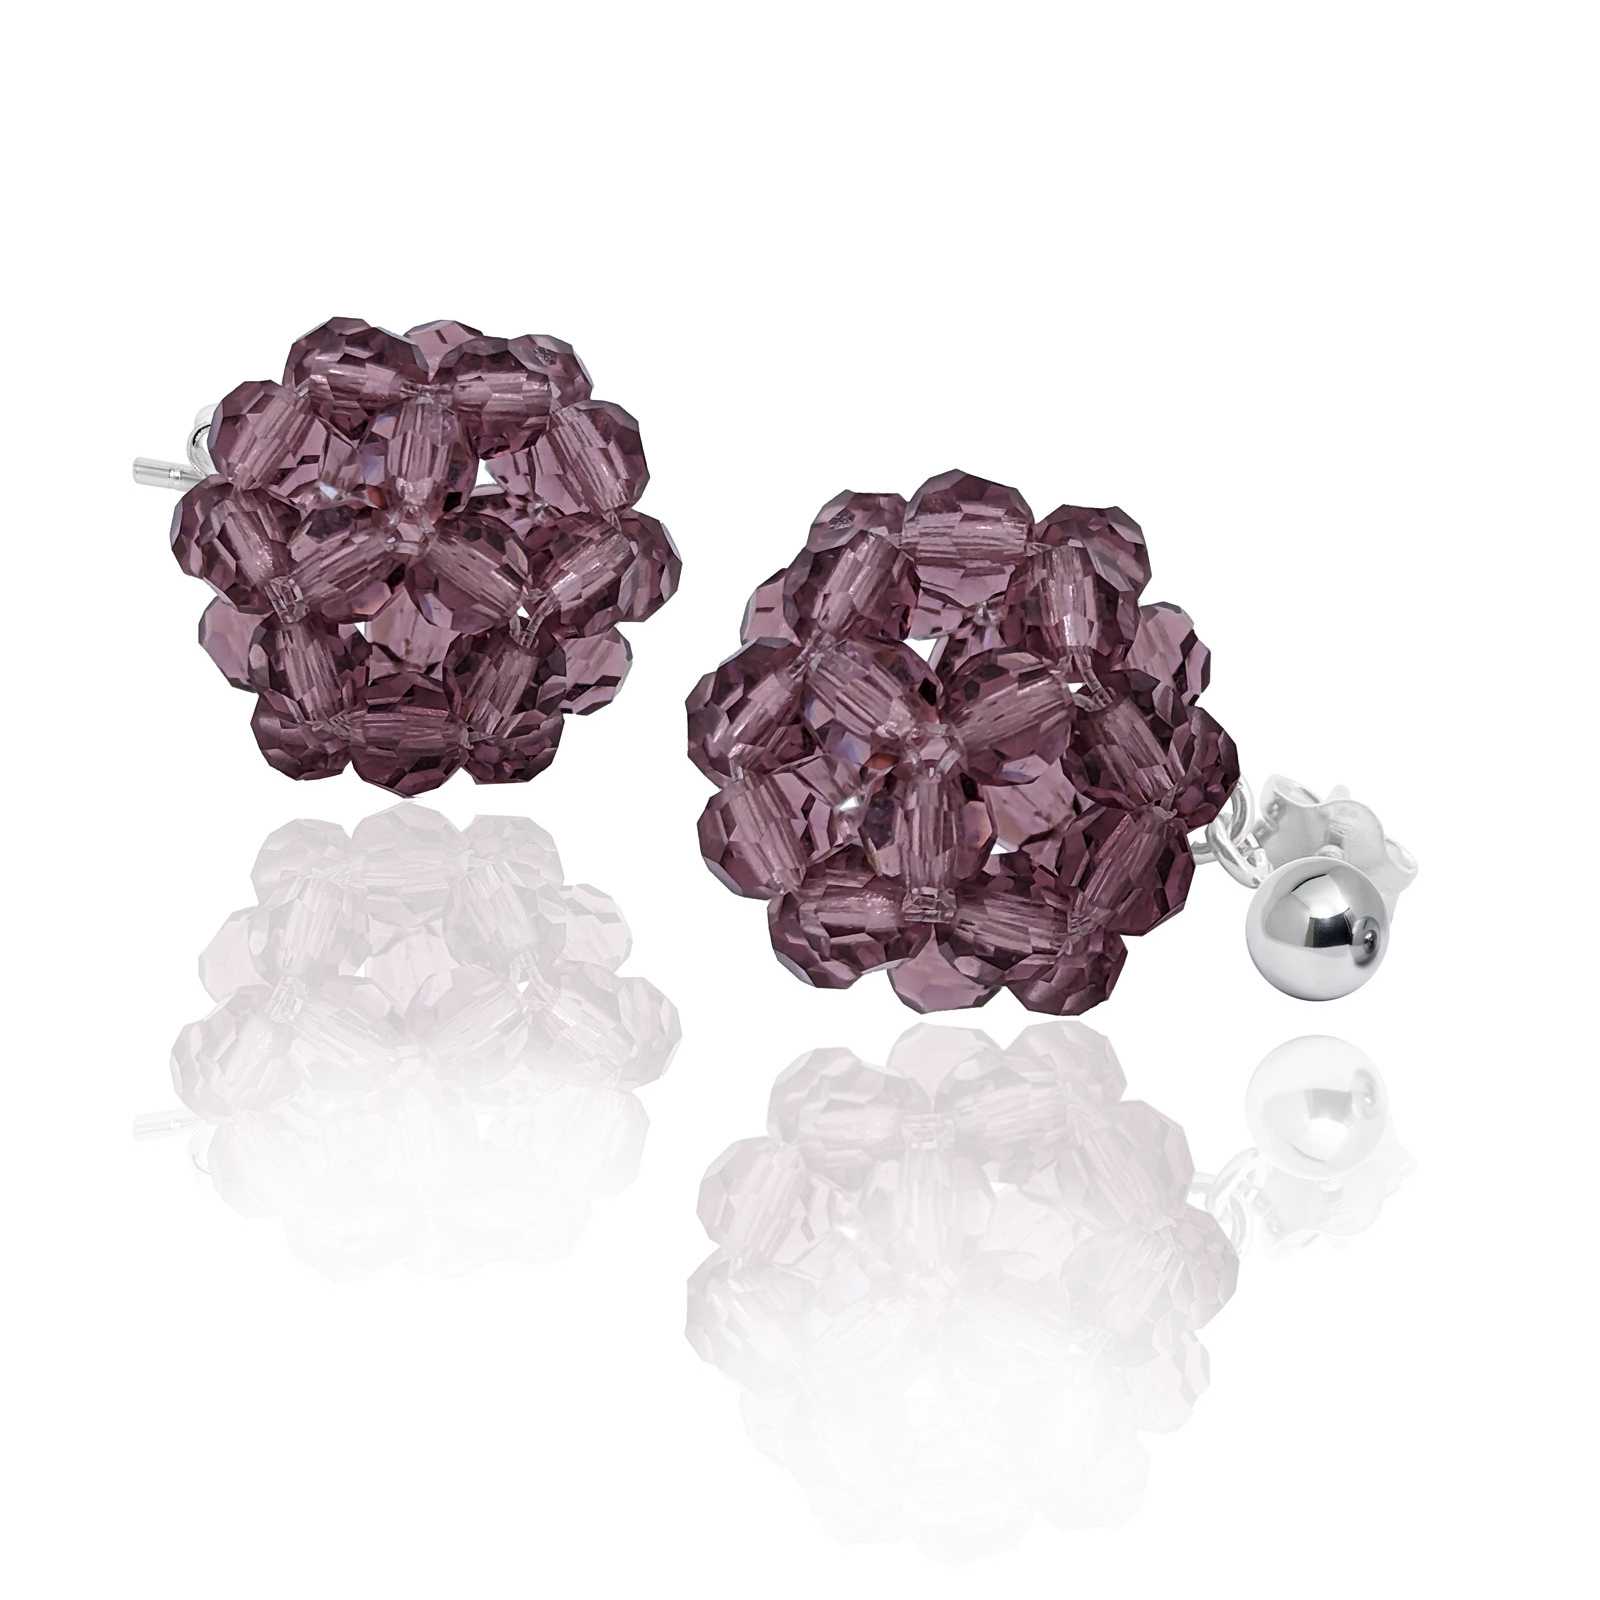 Crystal Ball Stud Earrings- | Mali's Canadian Handmade Jewelry 4 equal payments with Klarna
------------------------------------